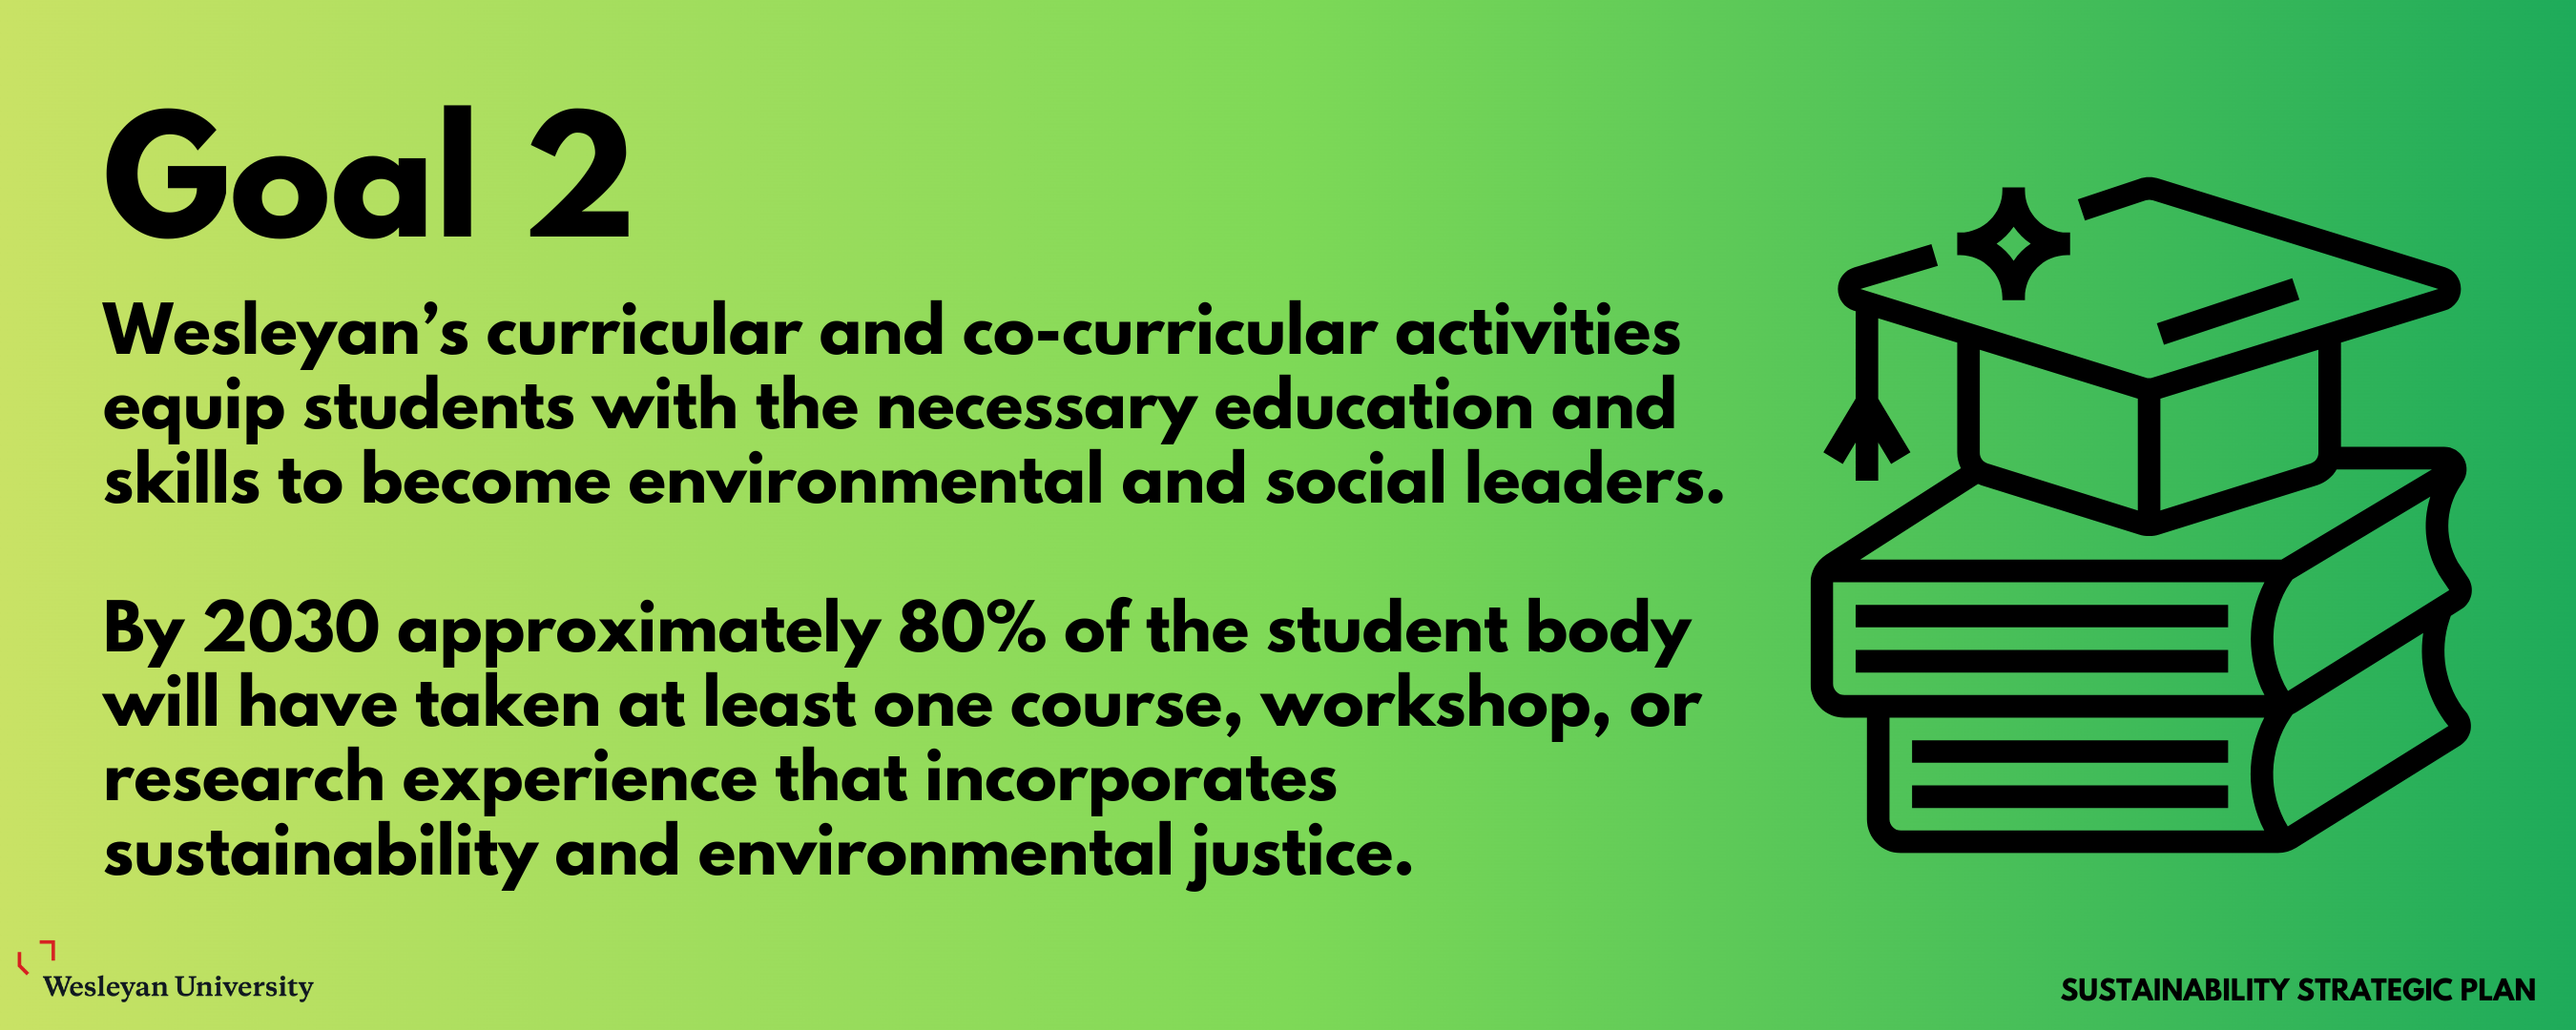 Goal 2: Wesleyan’s curricular and co-curricular activities equip students with the necessary education and skills to become environmental and social leaders. By 2030 approximately 80% of the student body will have taken at least one course, workshop, or research experience that incorporates sustainability and environmental justice. 